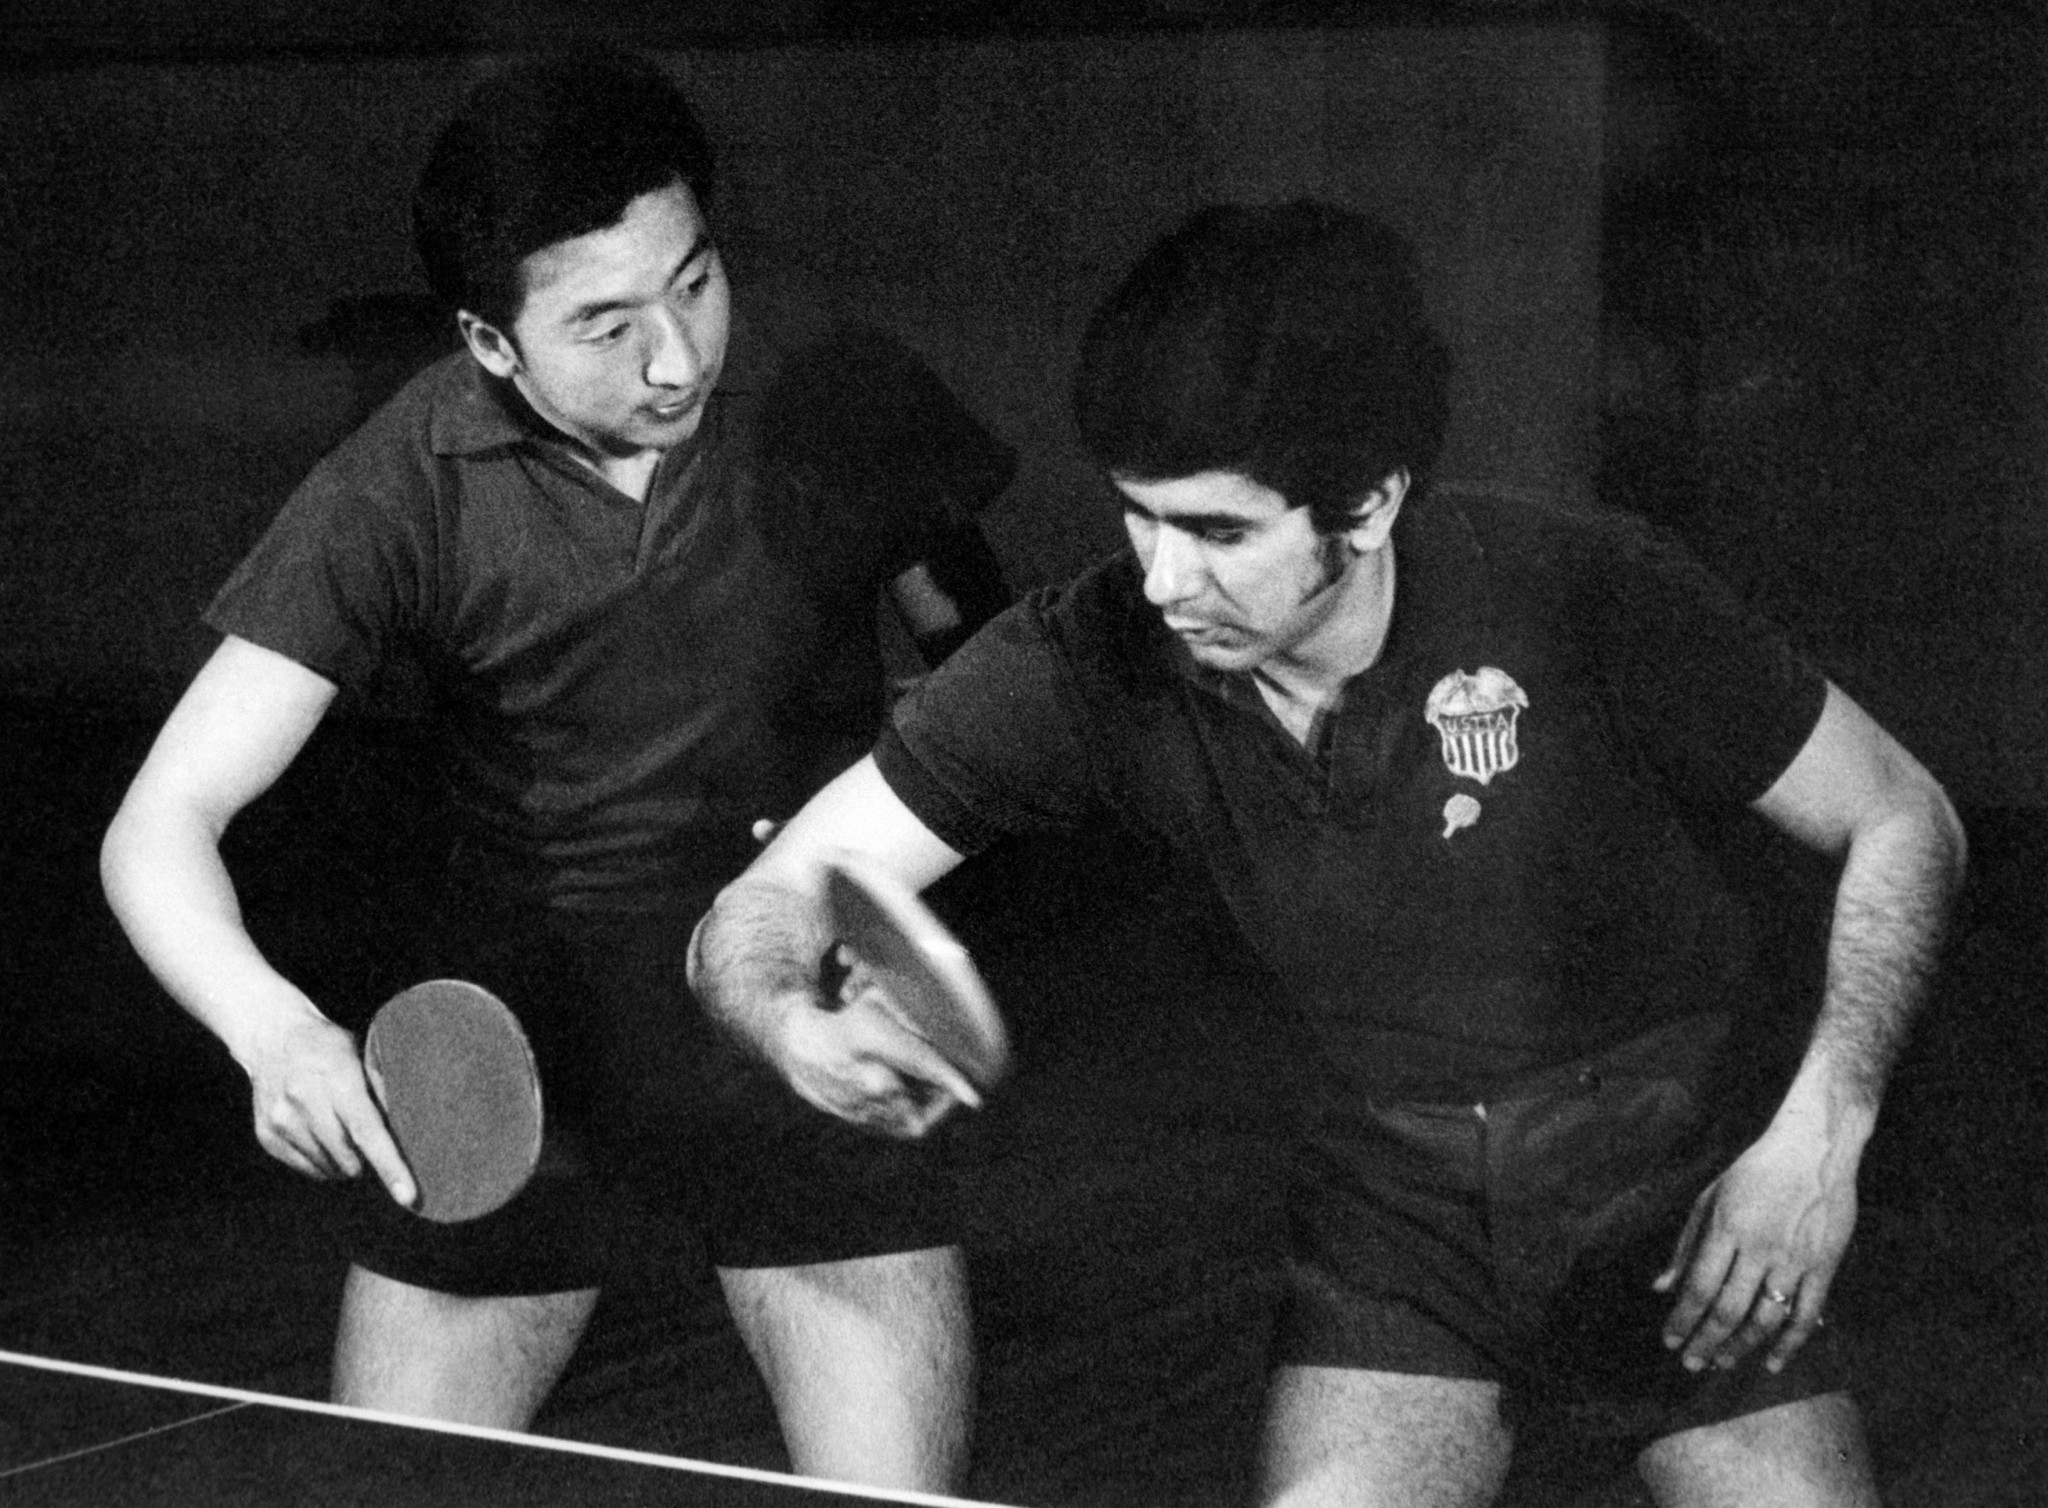 Ping-pong diplomacy in the 1970s cooled relations between China and the United States  ©Getty Images